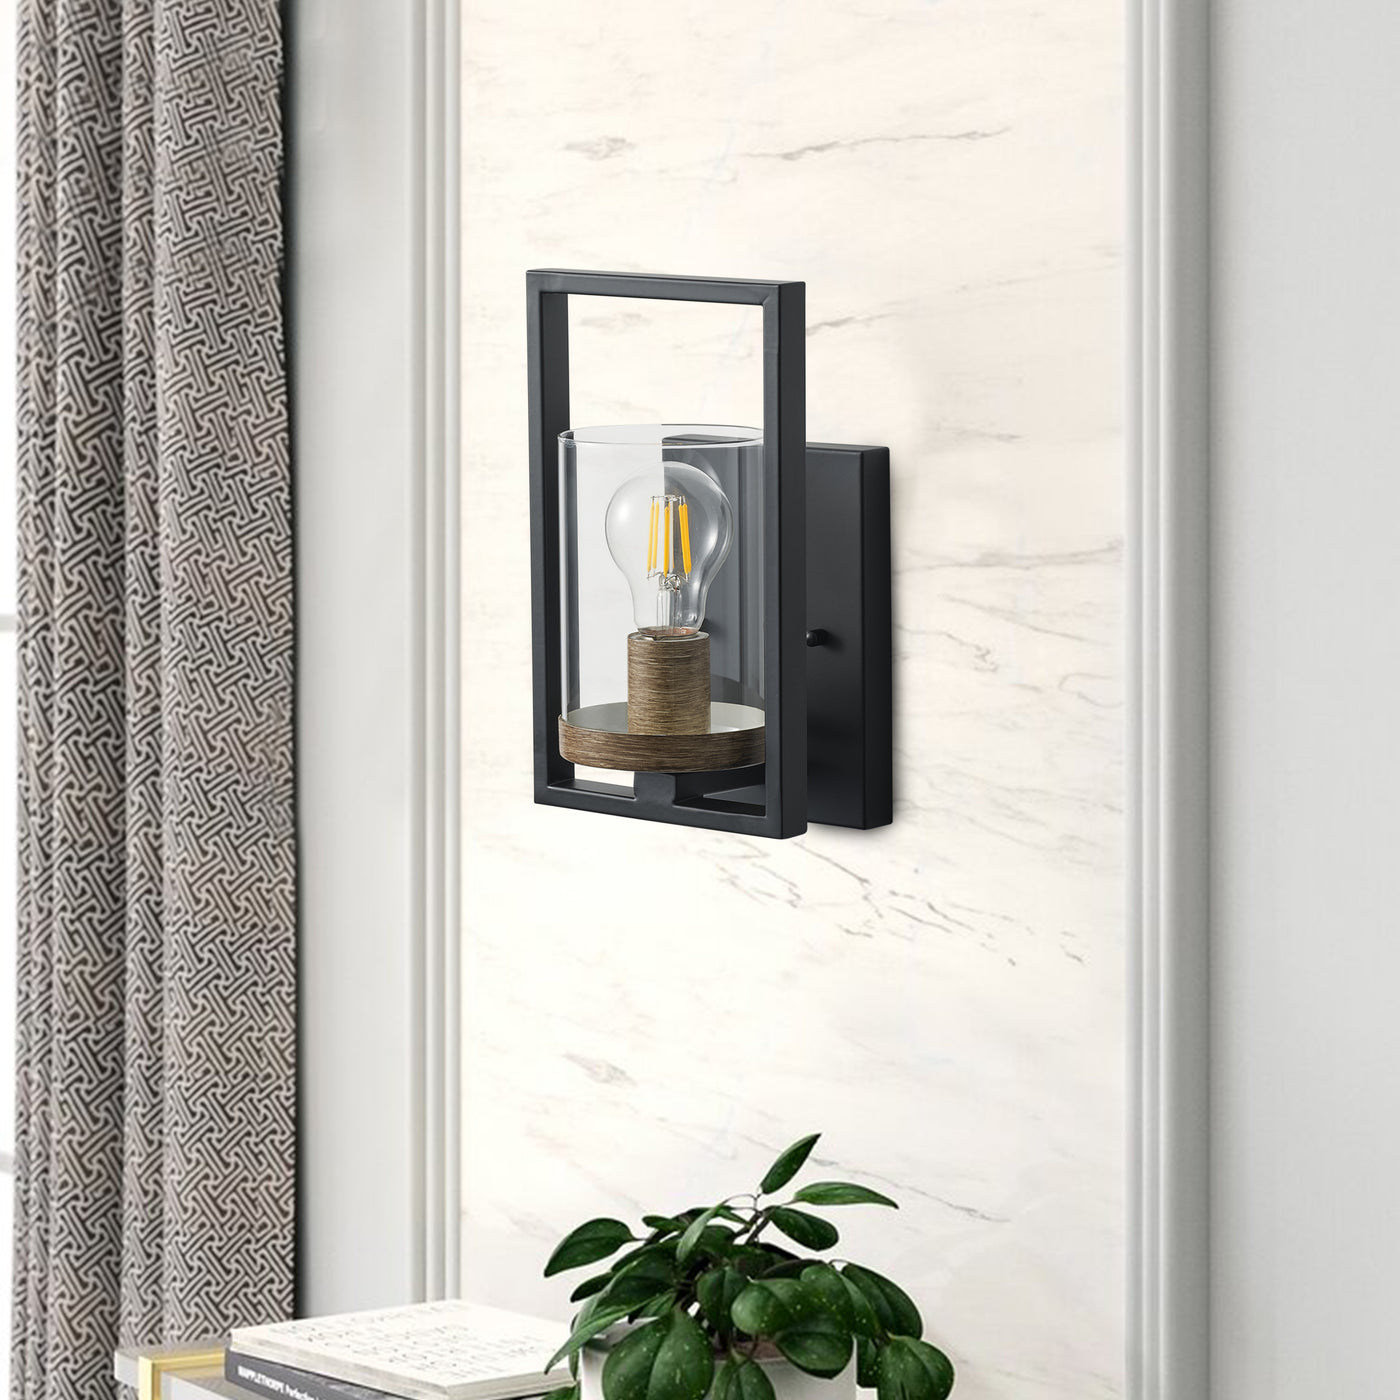 1-Light Glass Shade with Square Picture Frame Design Wall Sconce